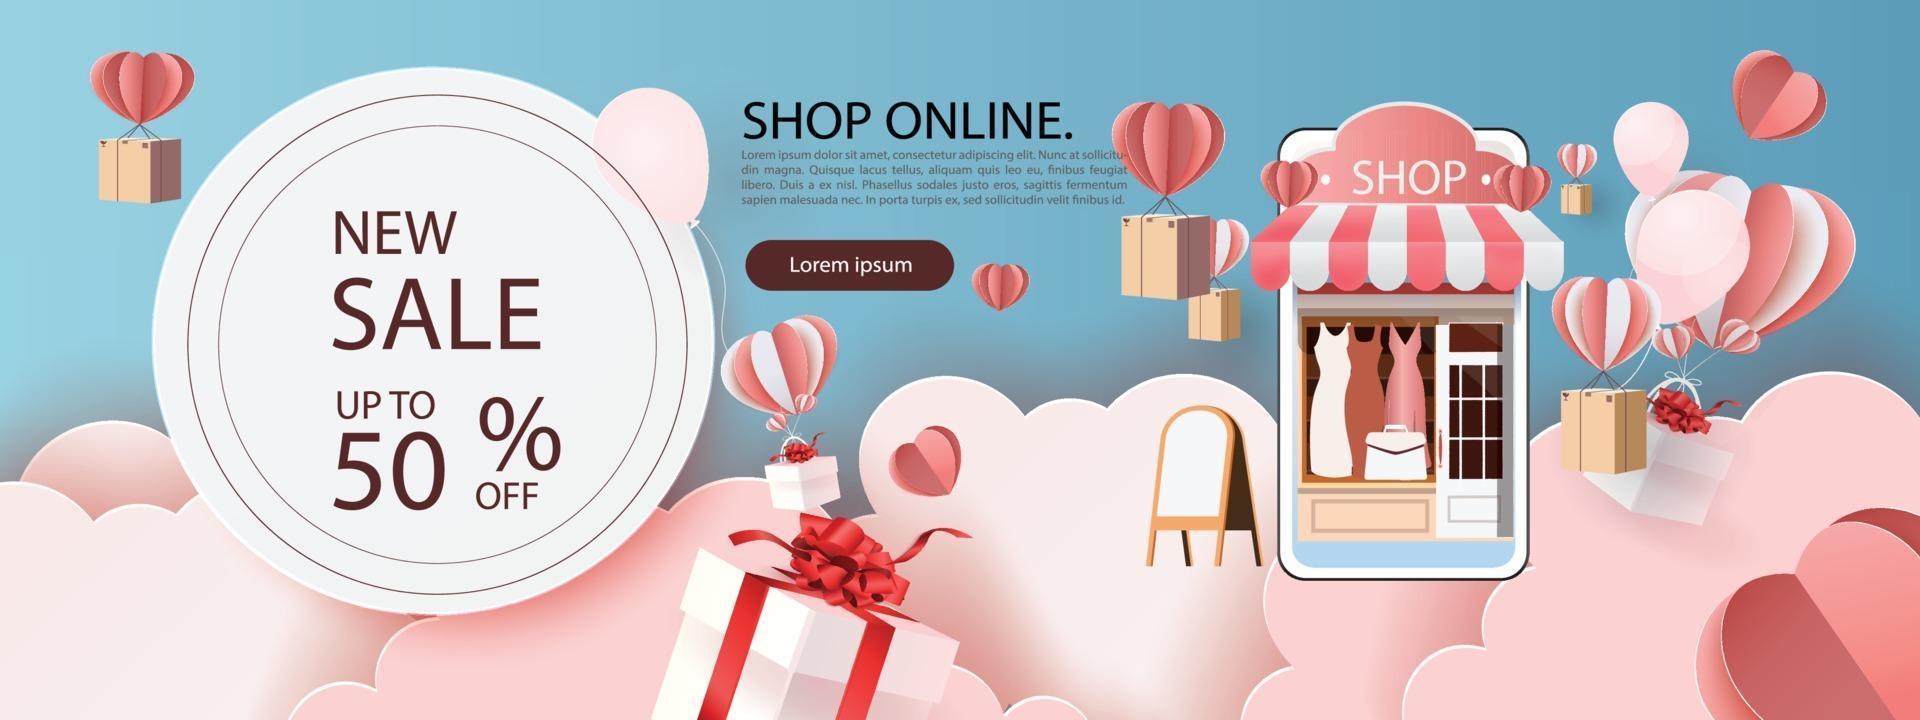 paper art shopping online on smartphone and new buy sale promotion backgroud for banner market ecommerce. vector